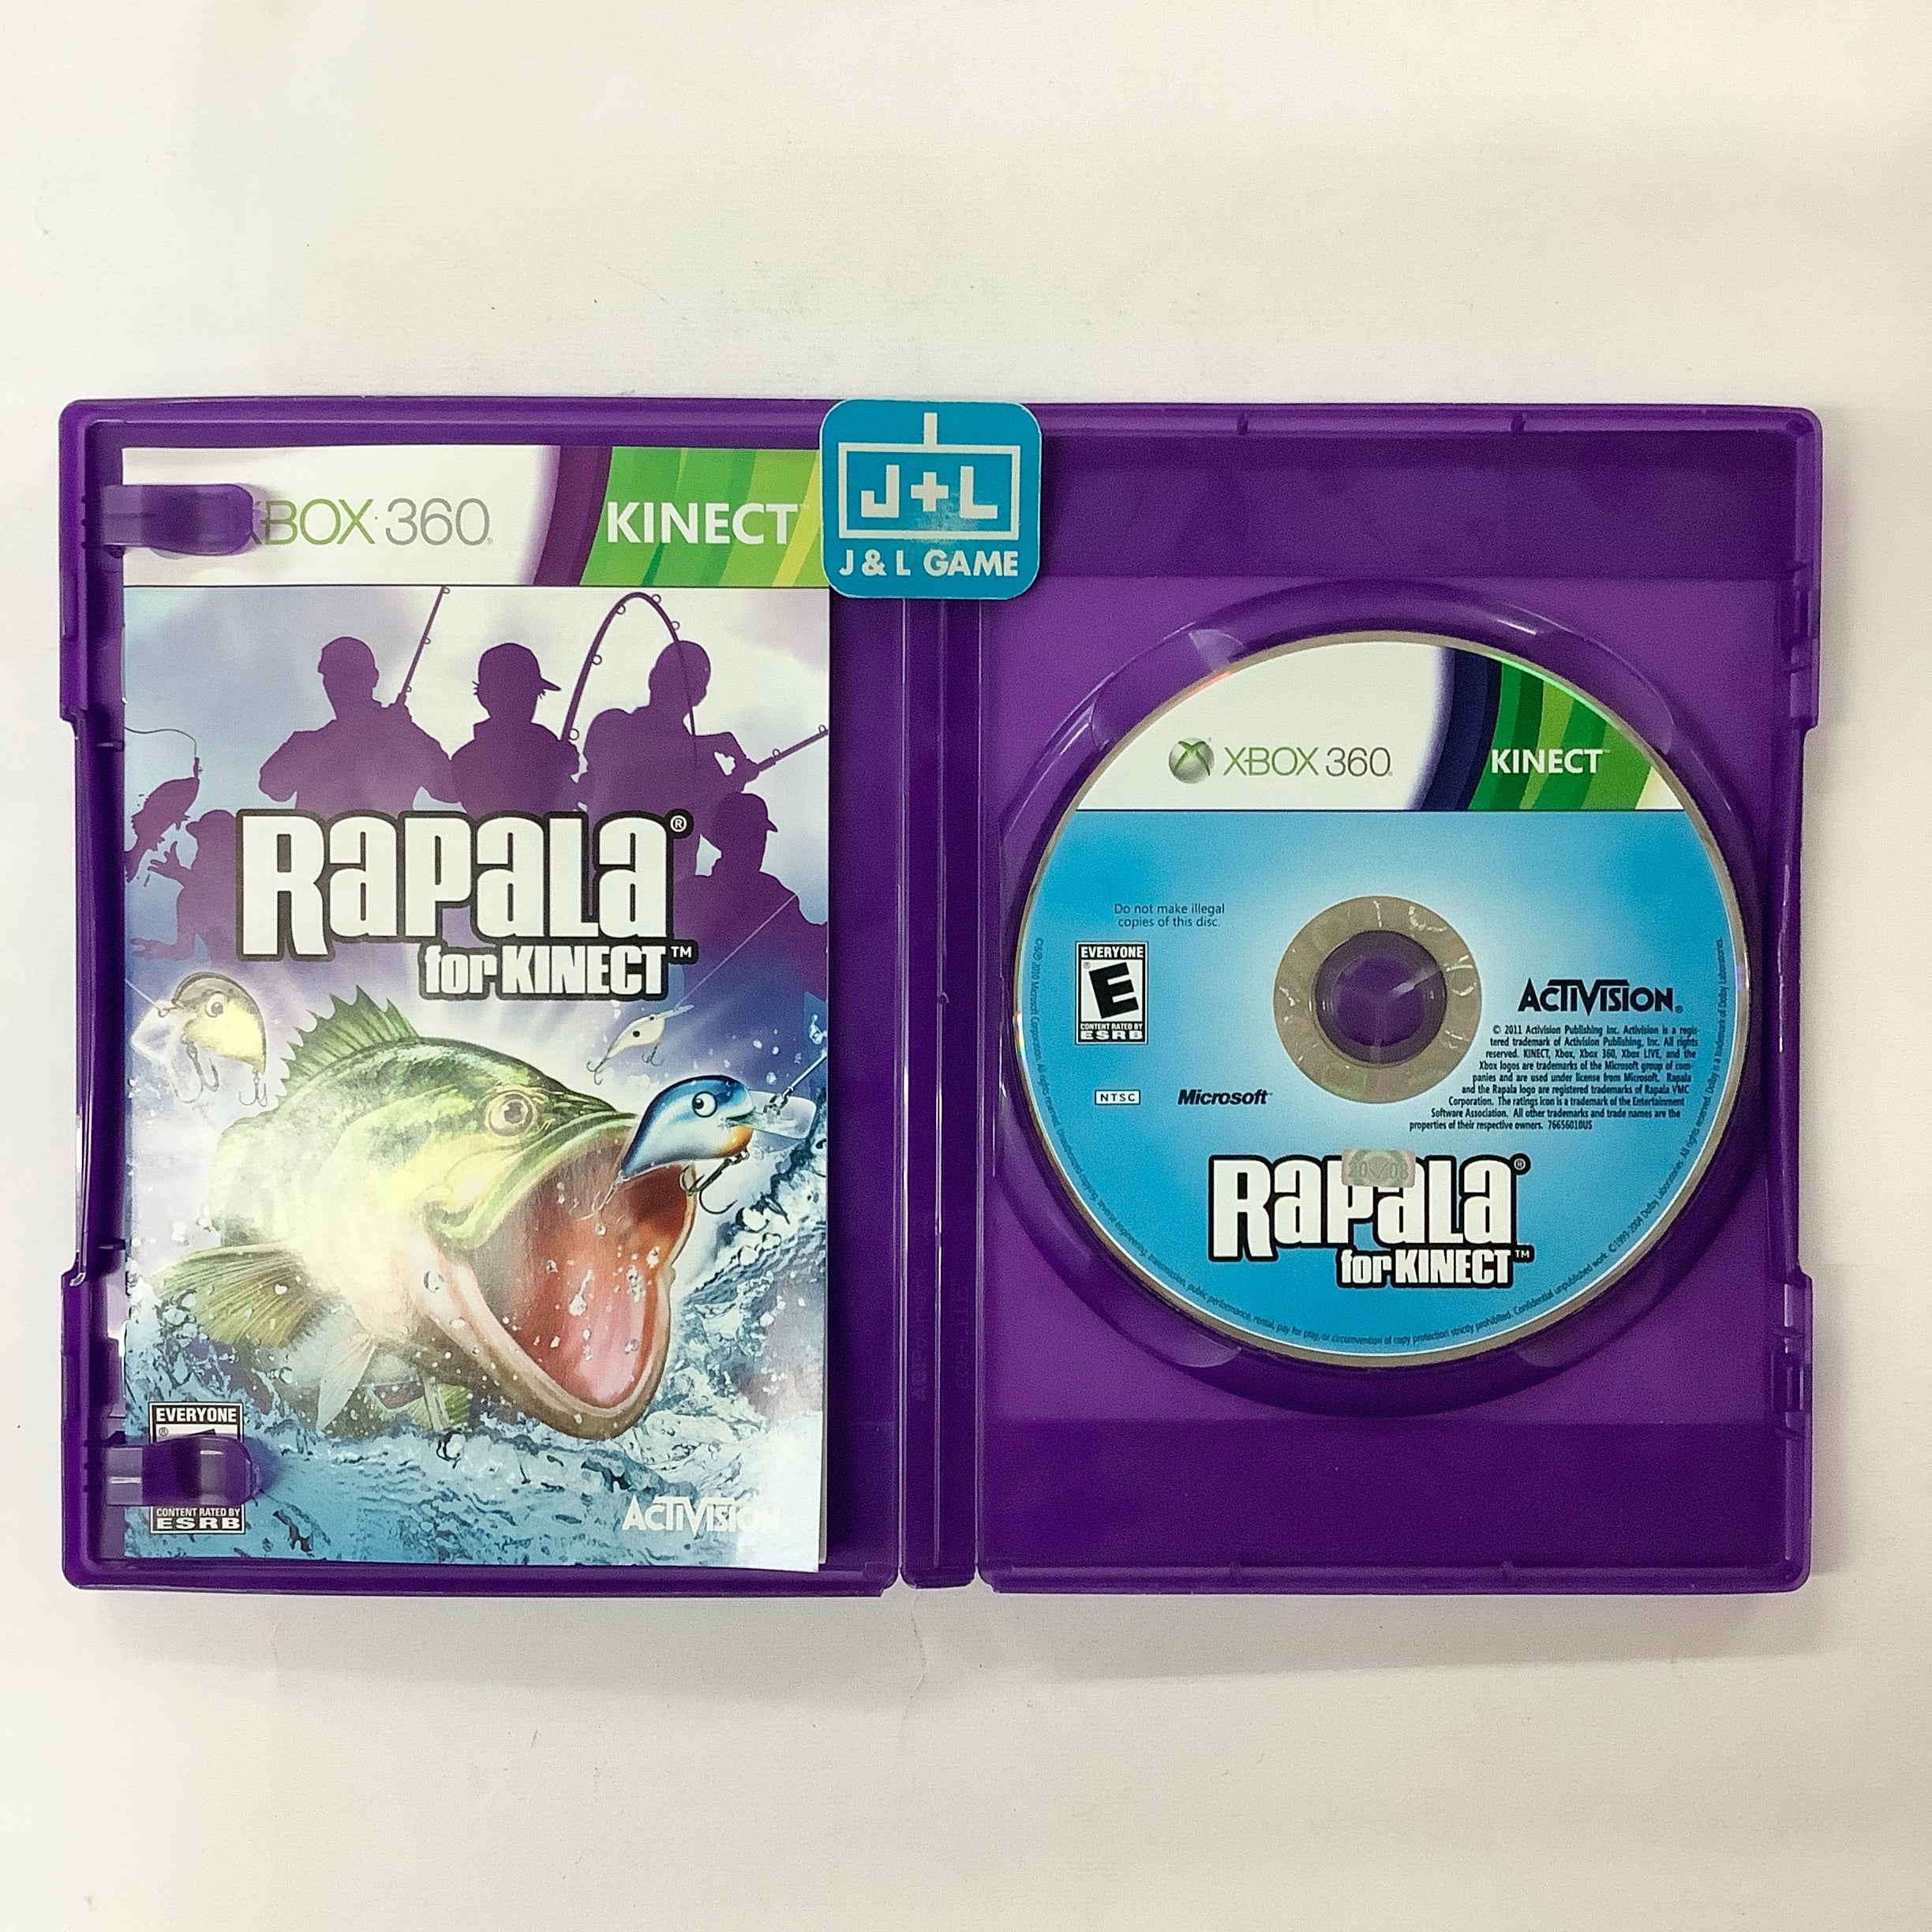 Rapala for Kinect (Kinect Required) - Xbox 360 [Pre-Owned] Video Games ACTIVISION   